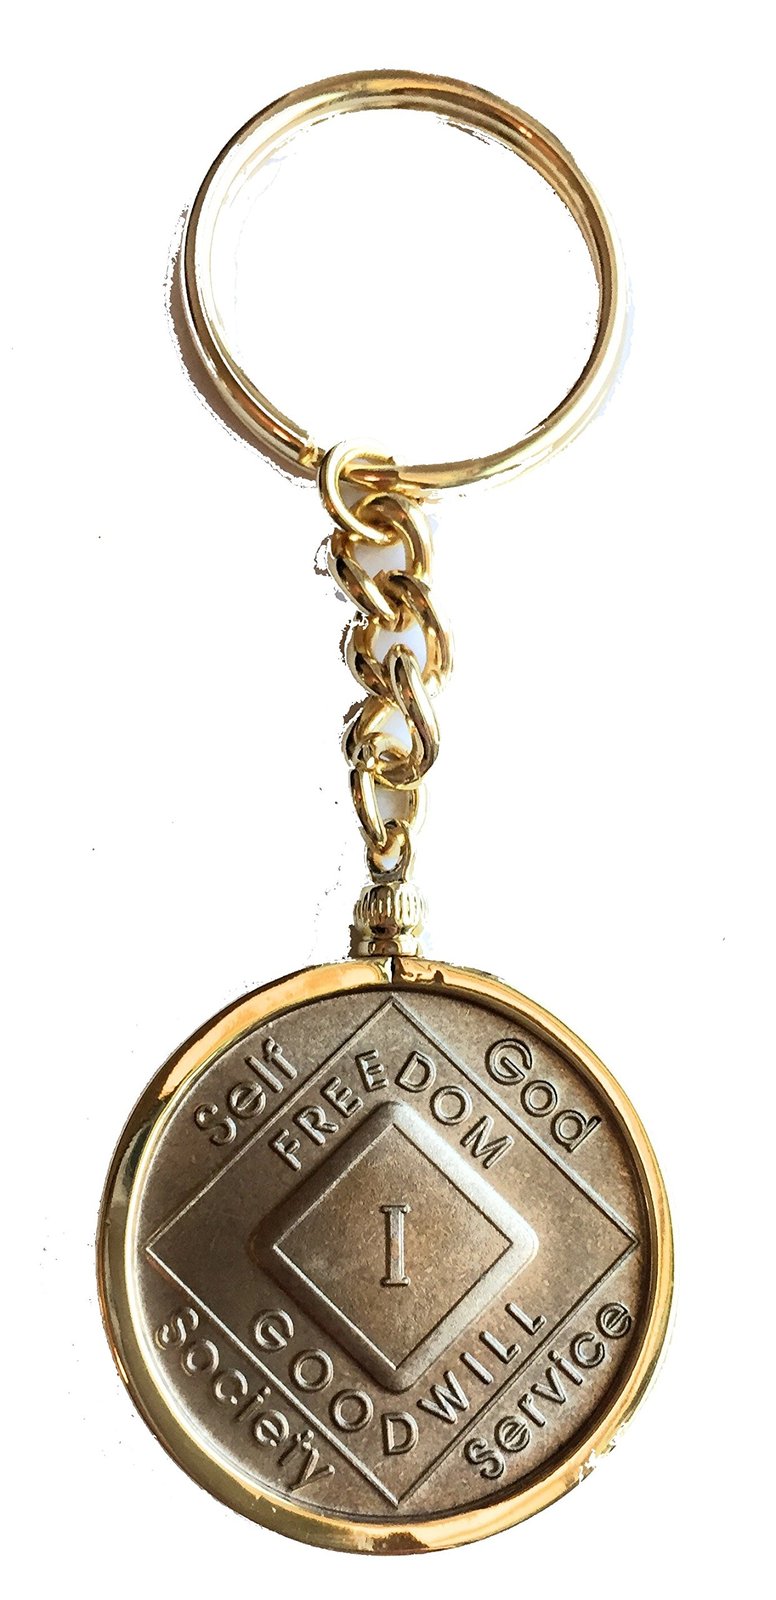 NA Medallion Holder Keychain 18k Gold Plated Narcotics Anonymous Key Chain